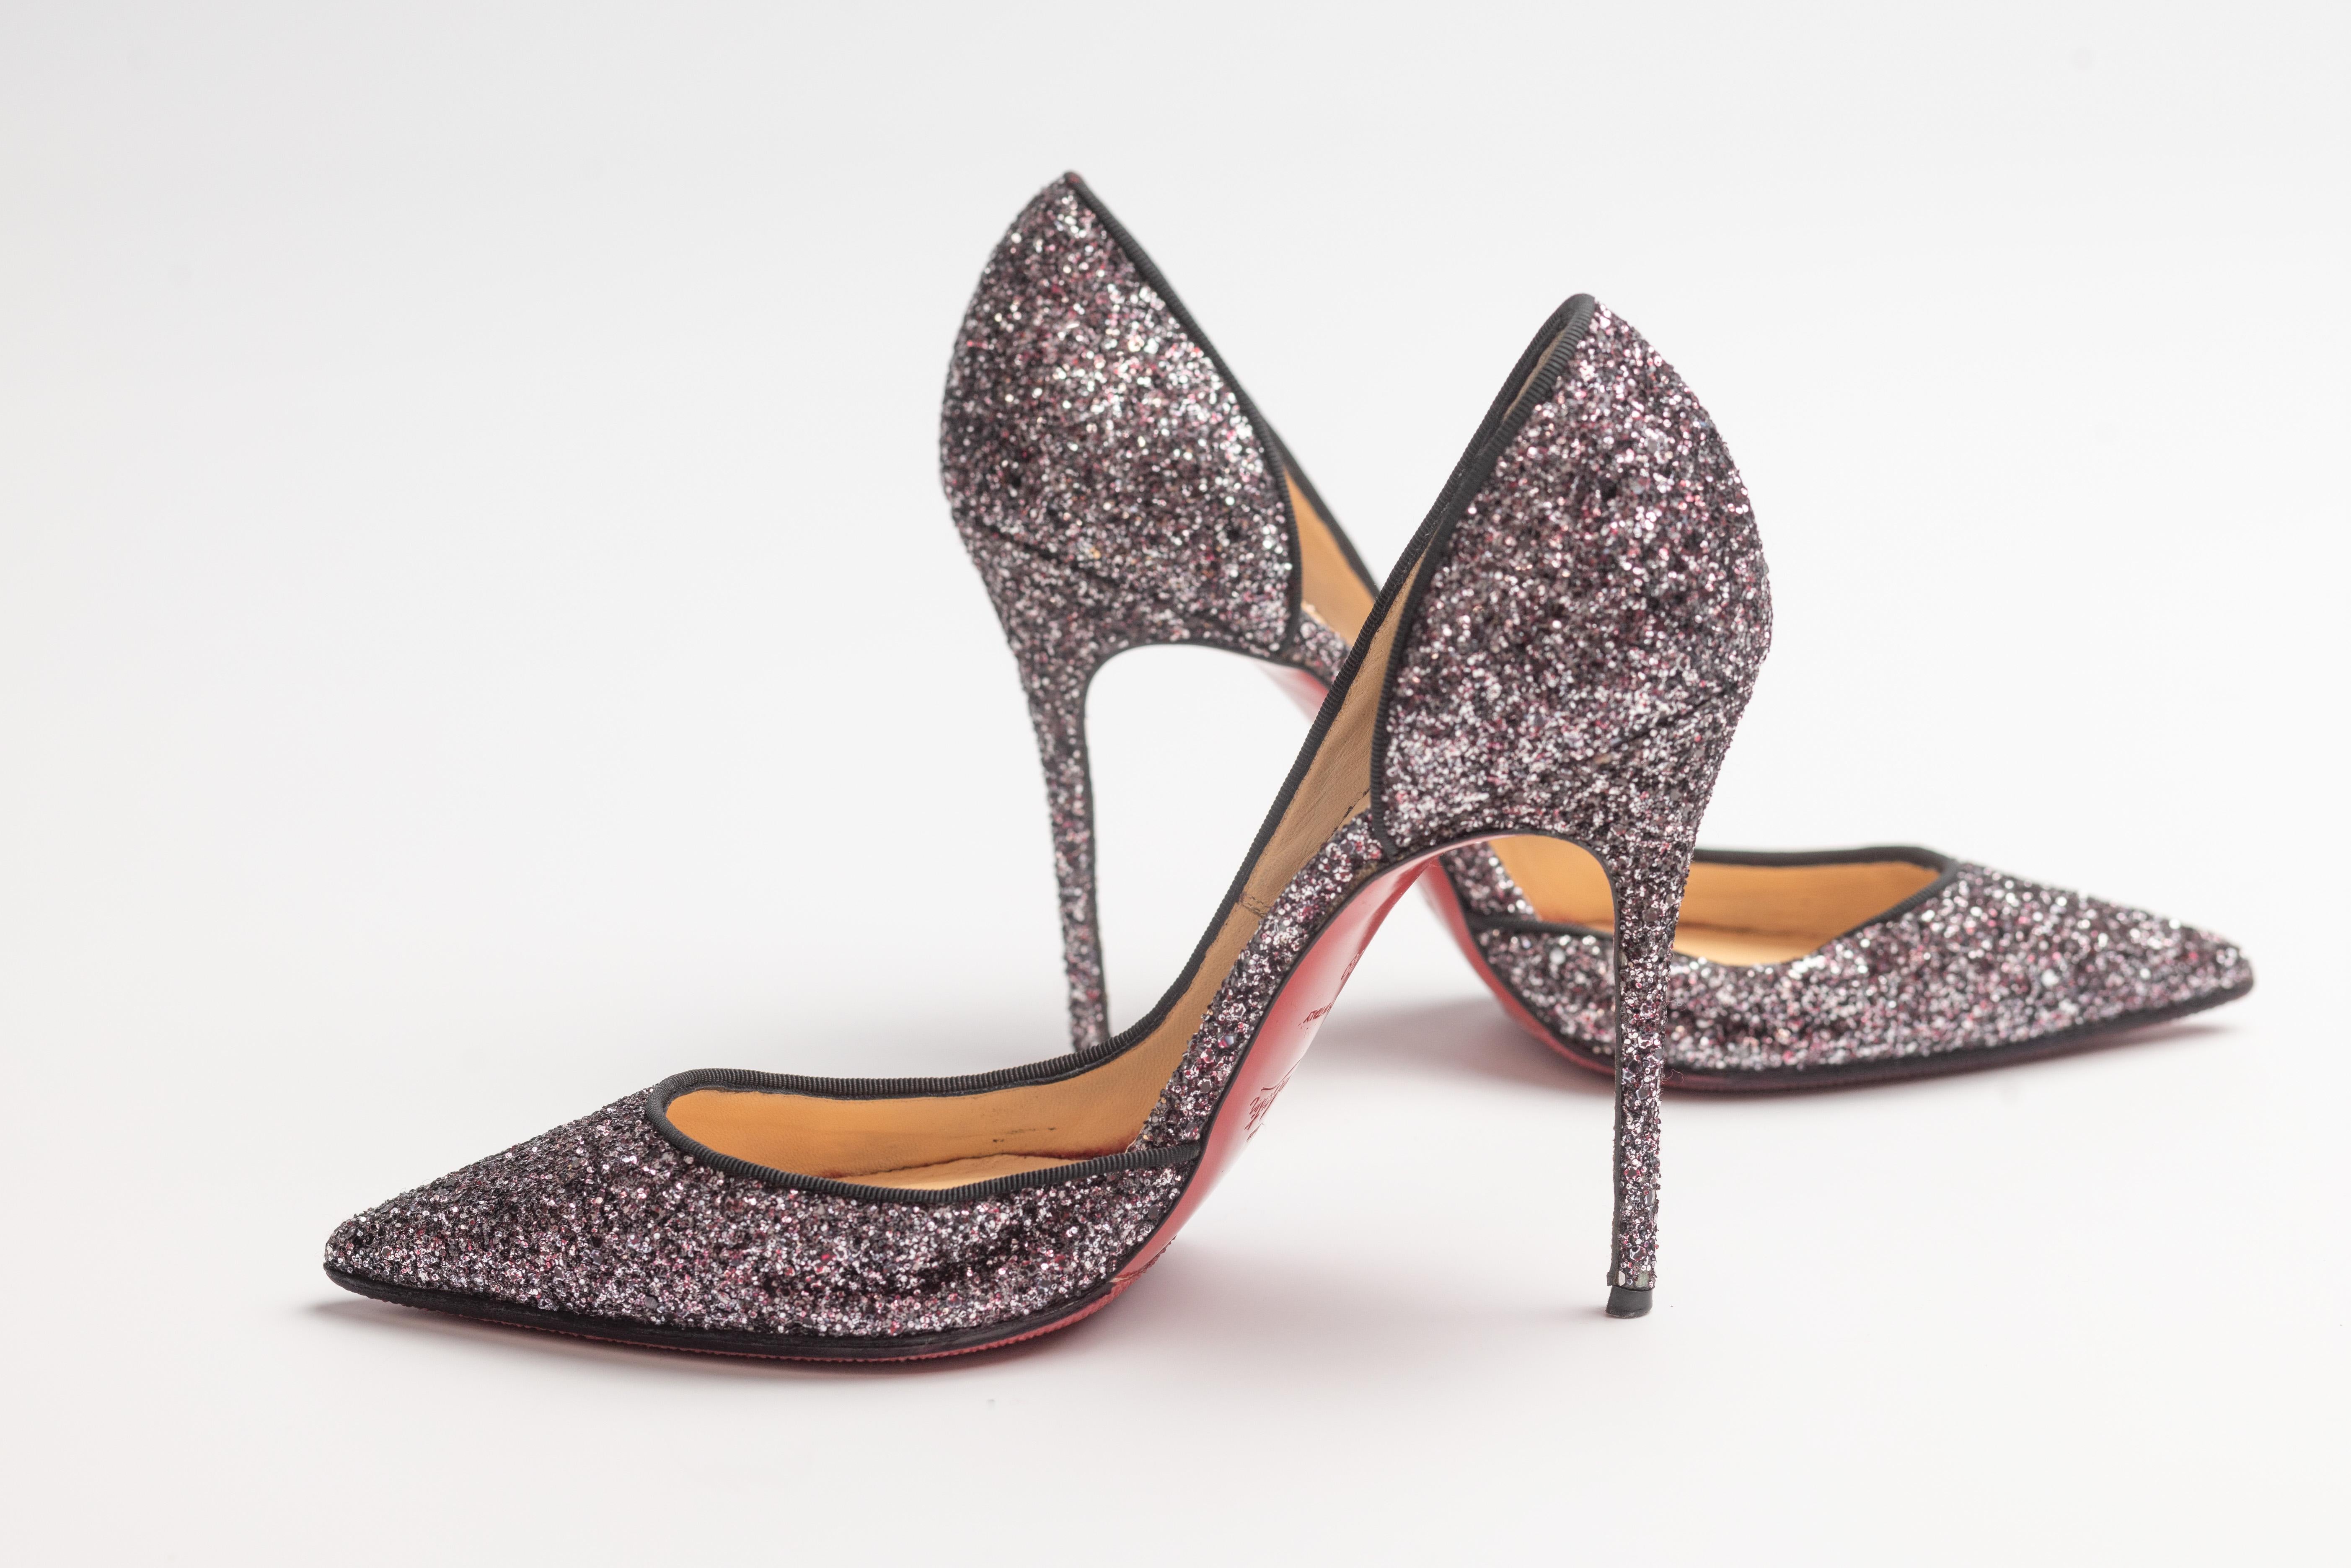 Louboutin's signature pumps are embellished with sparkling multicolor glitter. Polyester/polyurethane upper point toe slip-on style leather sole.

Color: Lauder or rose antique with black glitter
Material: Leather with glitter
Size: 39 EU / 8